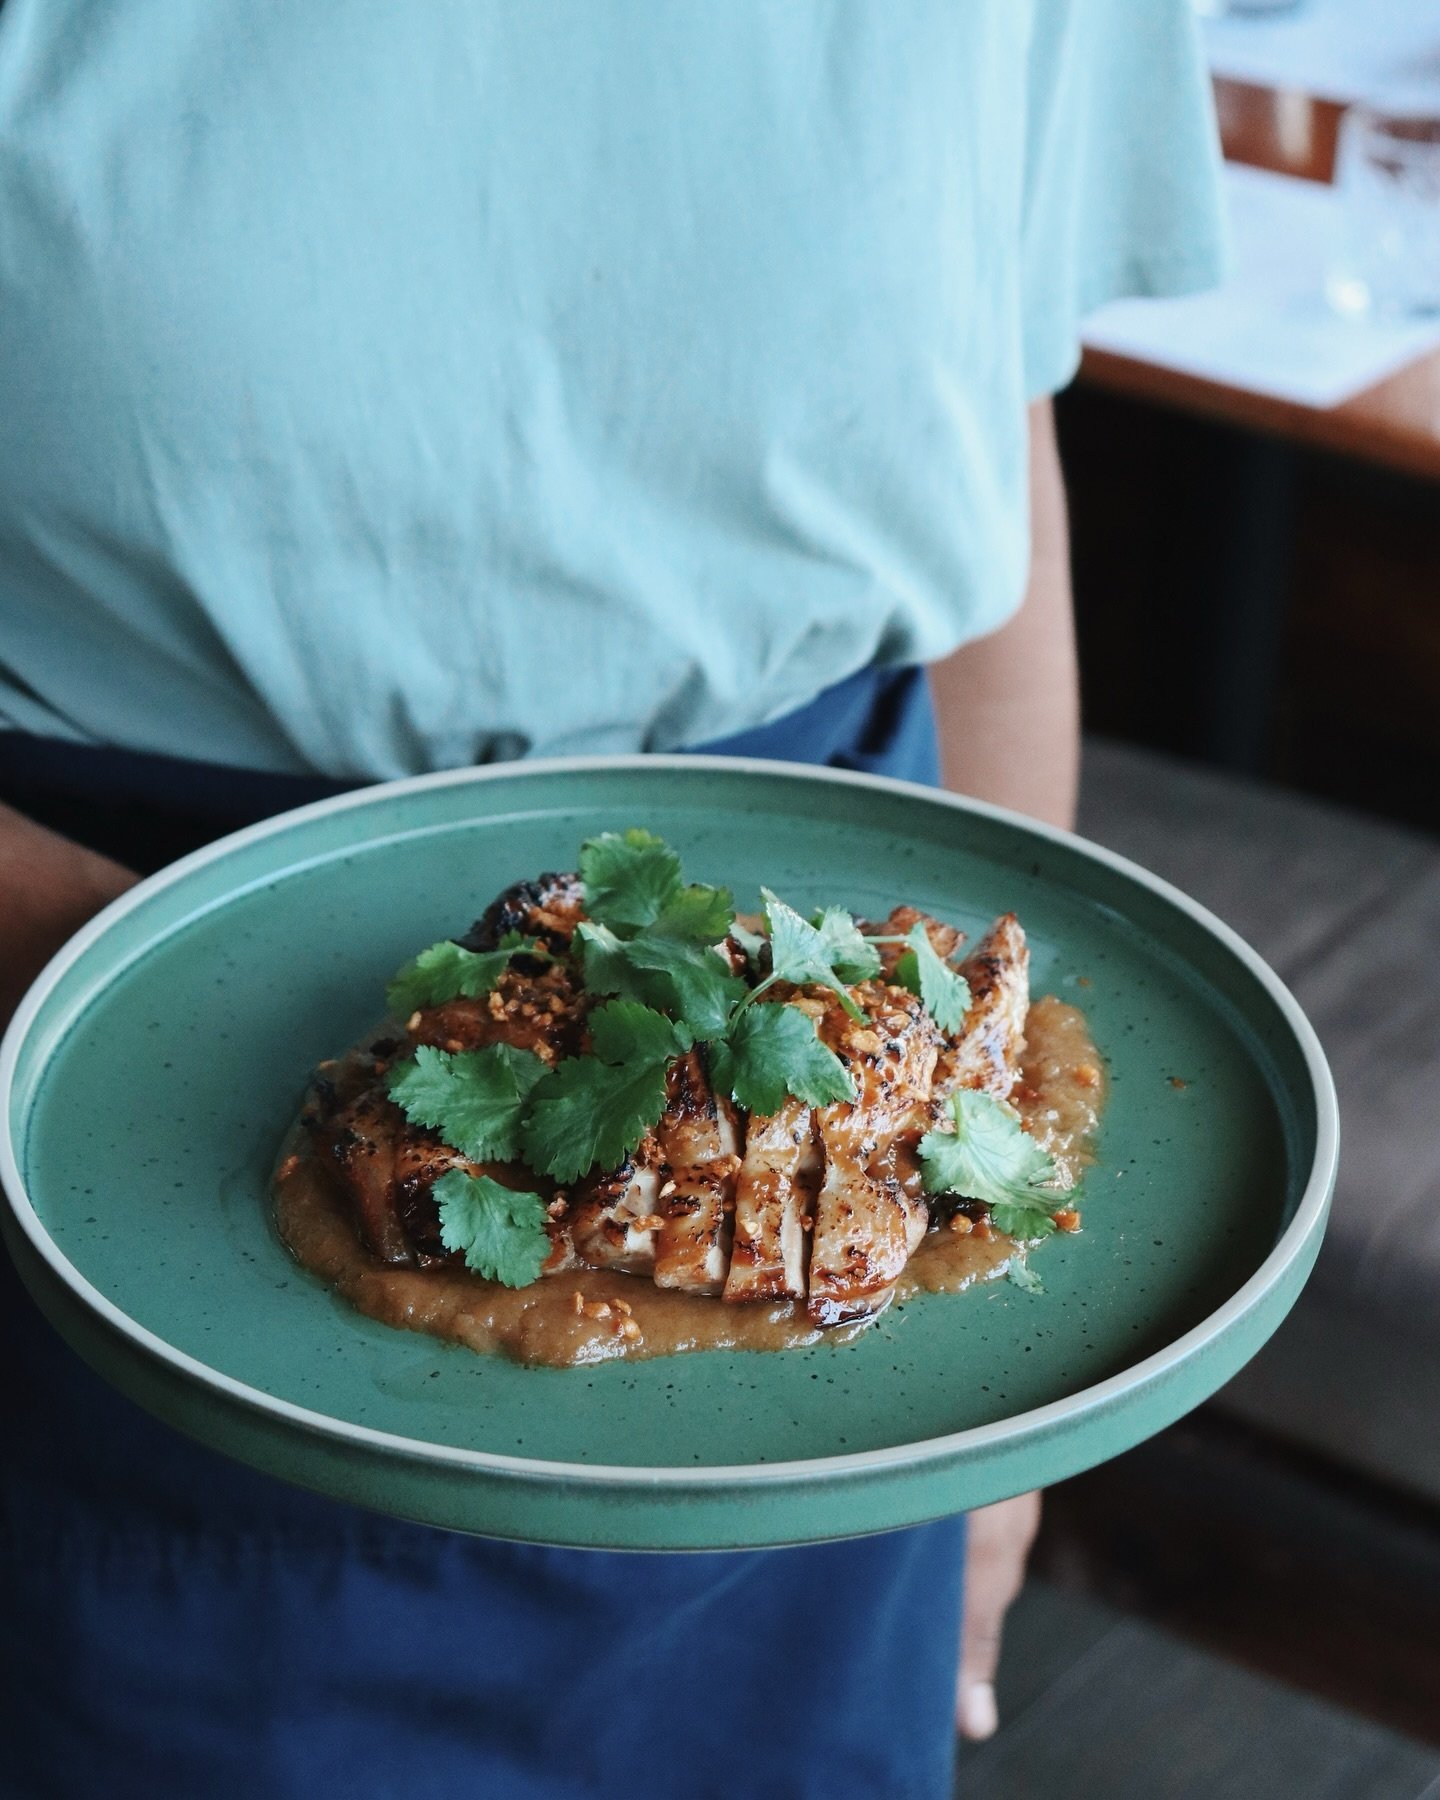 Grilled chicken thigh glazed in a sweet soy sauce and served on a bed of delicious onion jam, topped with crispy garlic and fresh coriander. Now available on the Shorehouse menu, this is the perfect dish to share around the table on your next visit! 